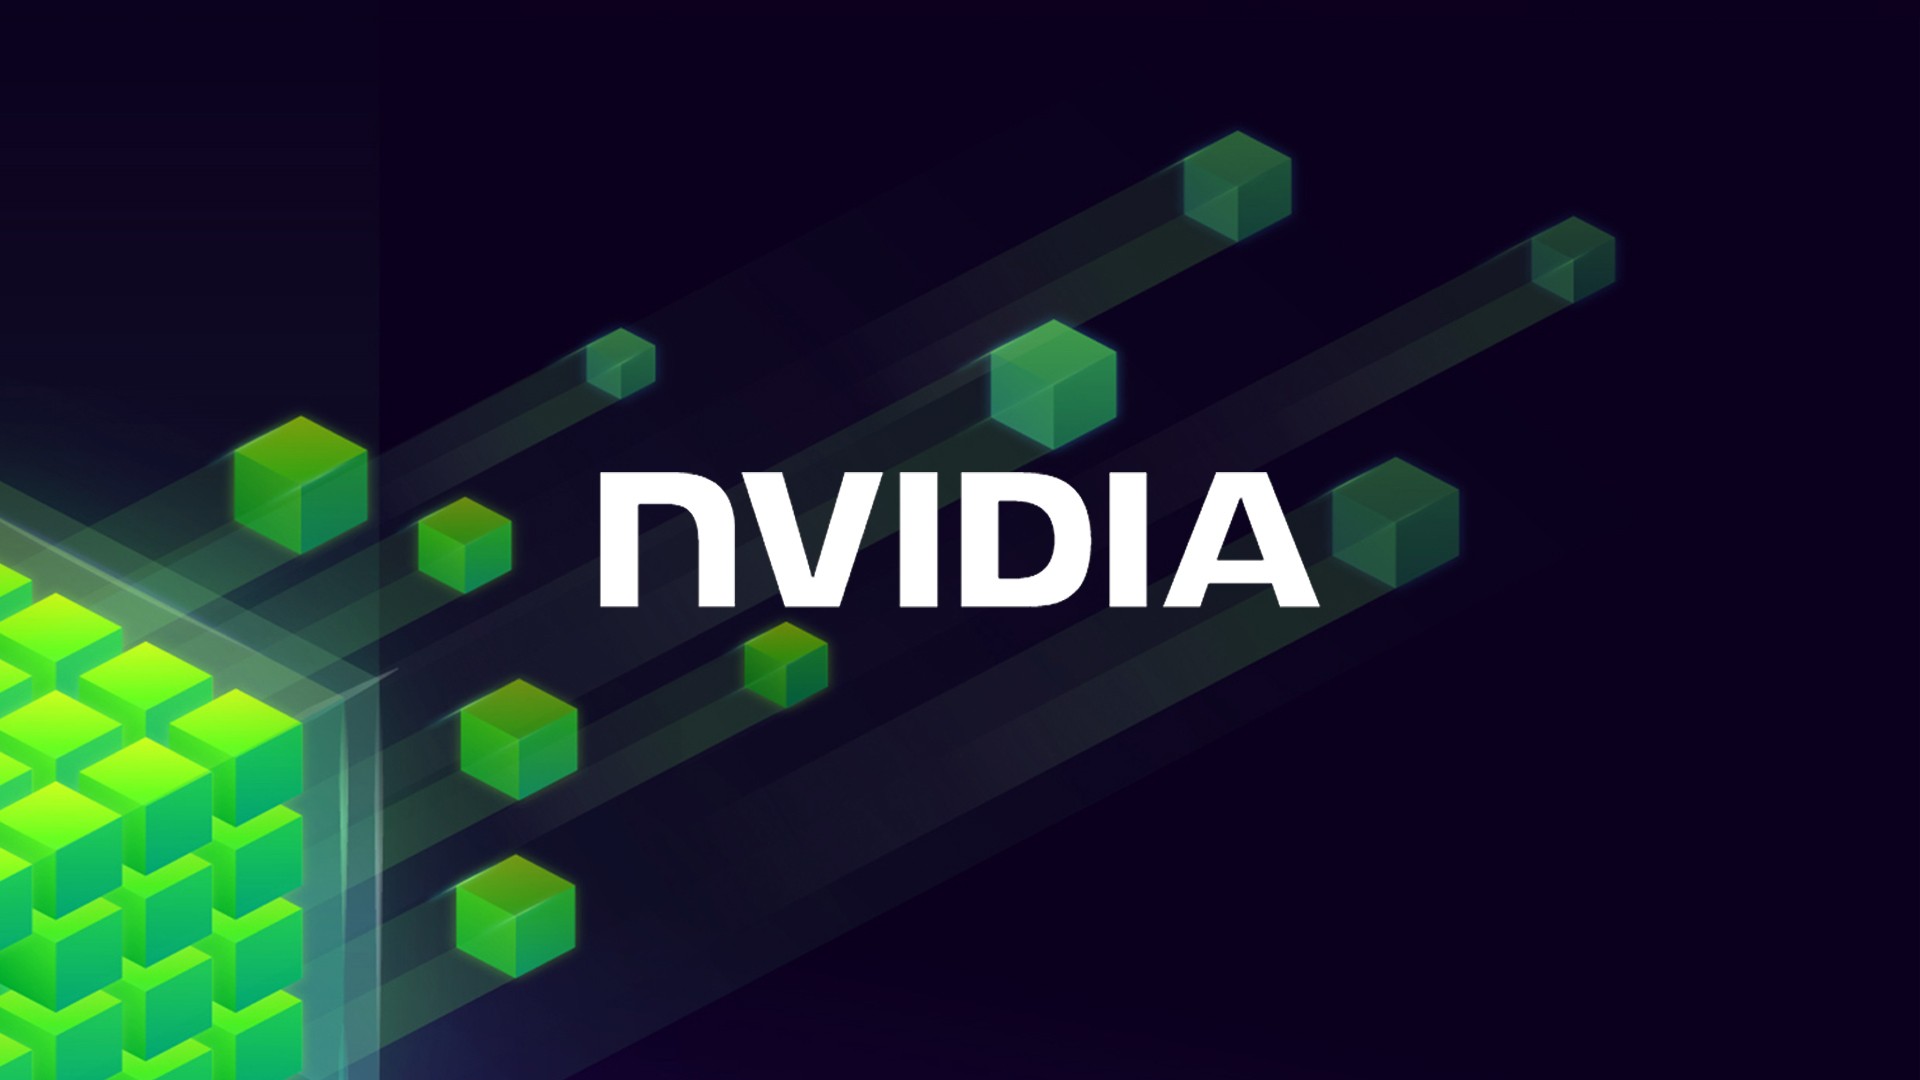 Nvidia could reach the mark of 3.5 million H100 GPUs, with consumption